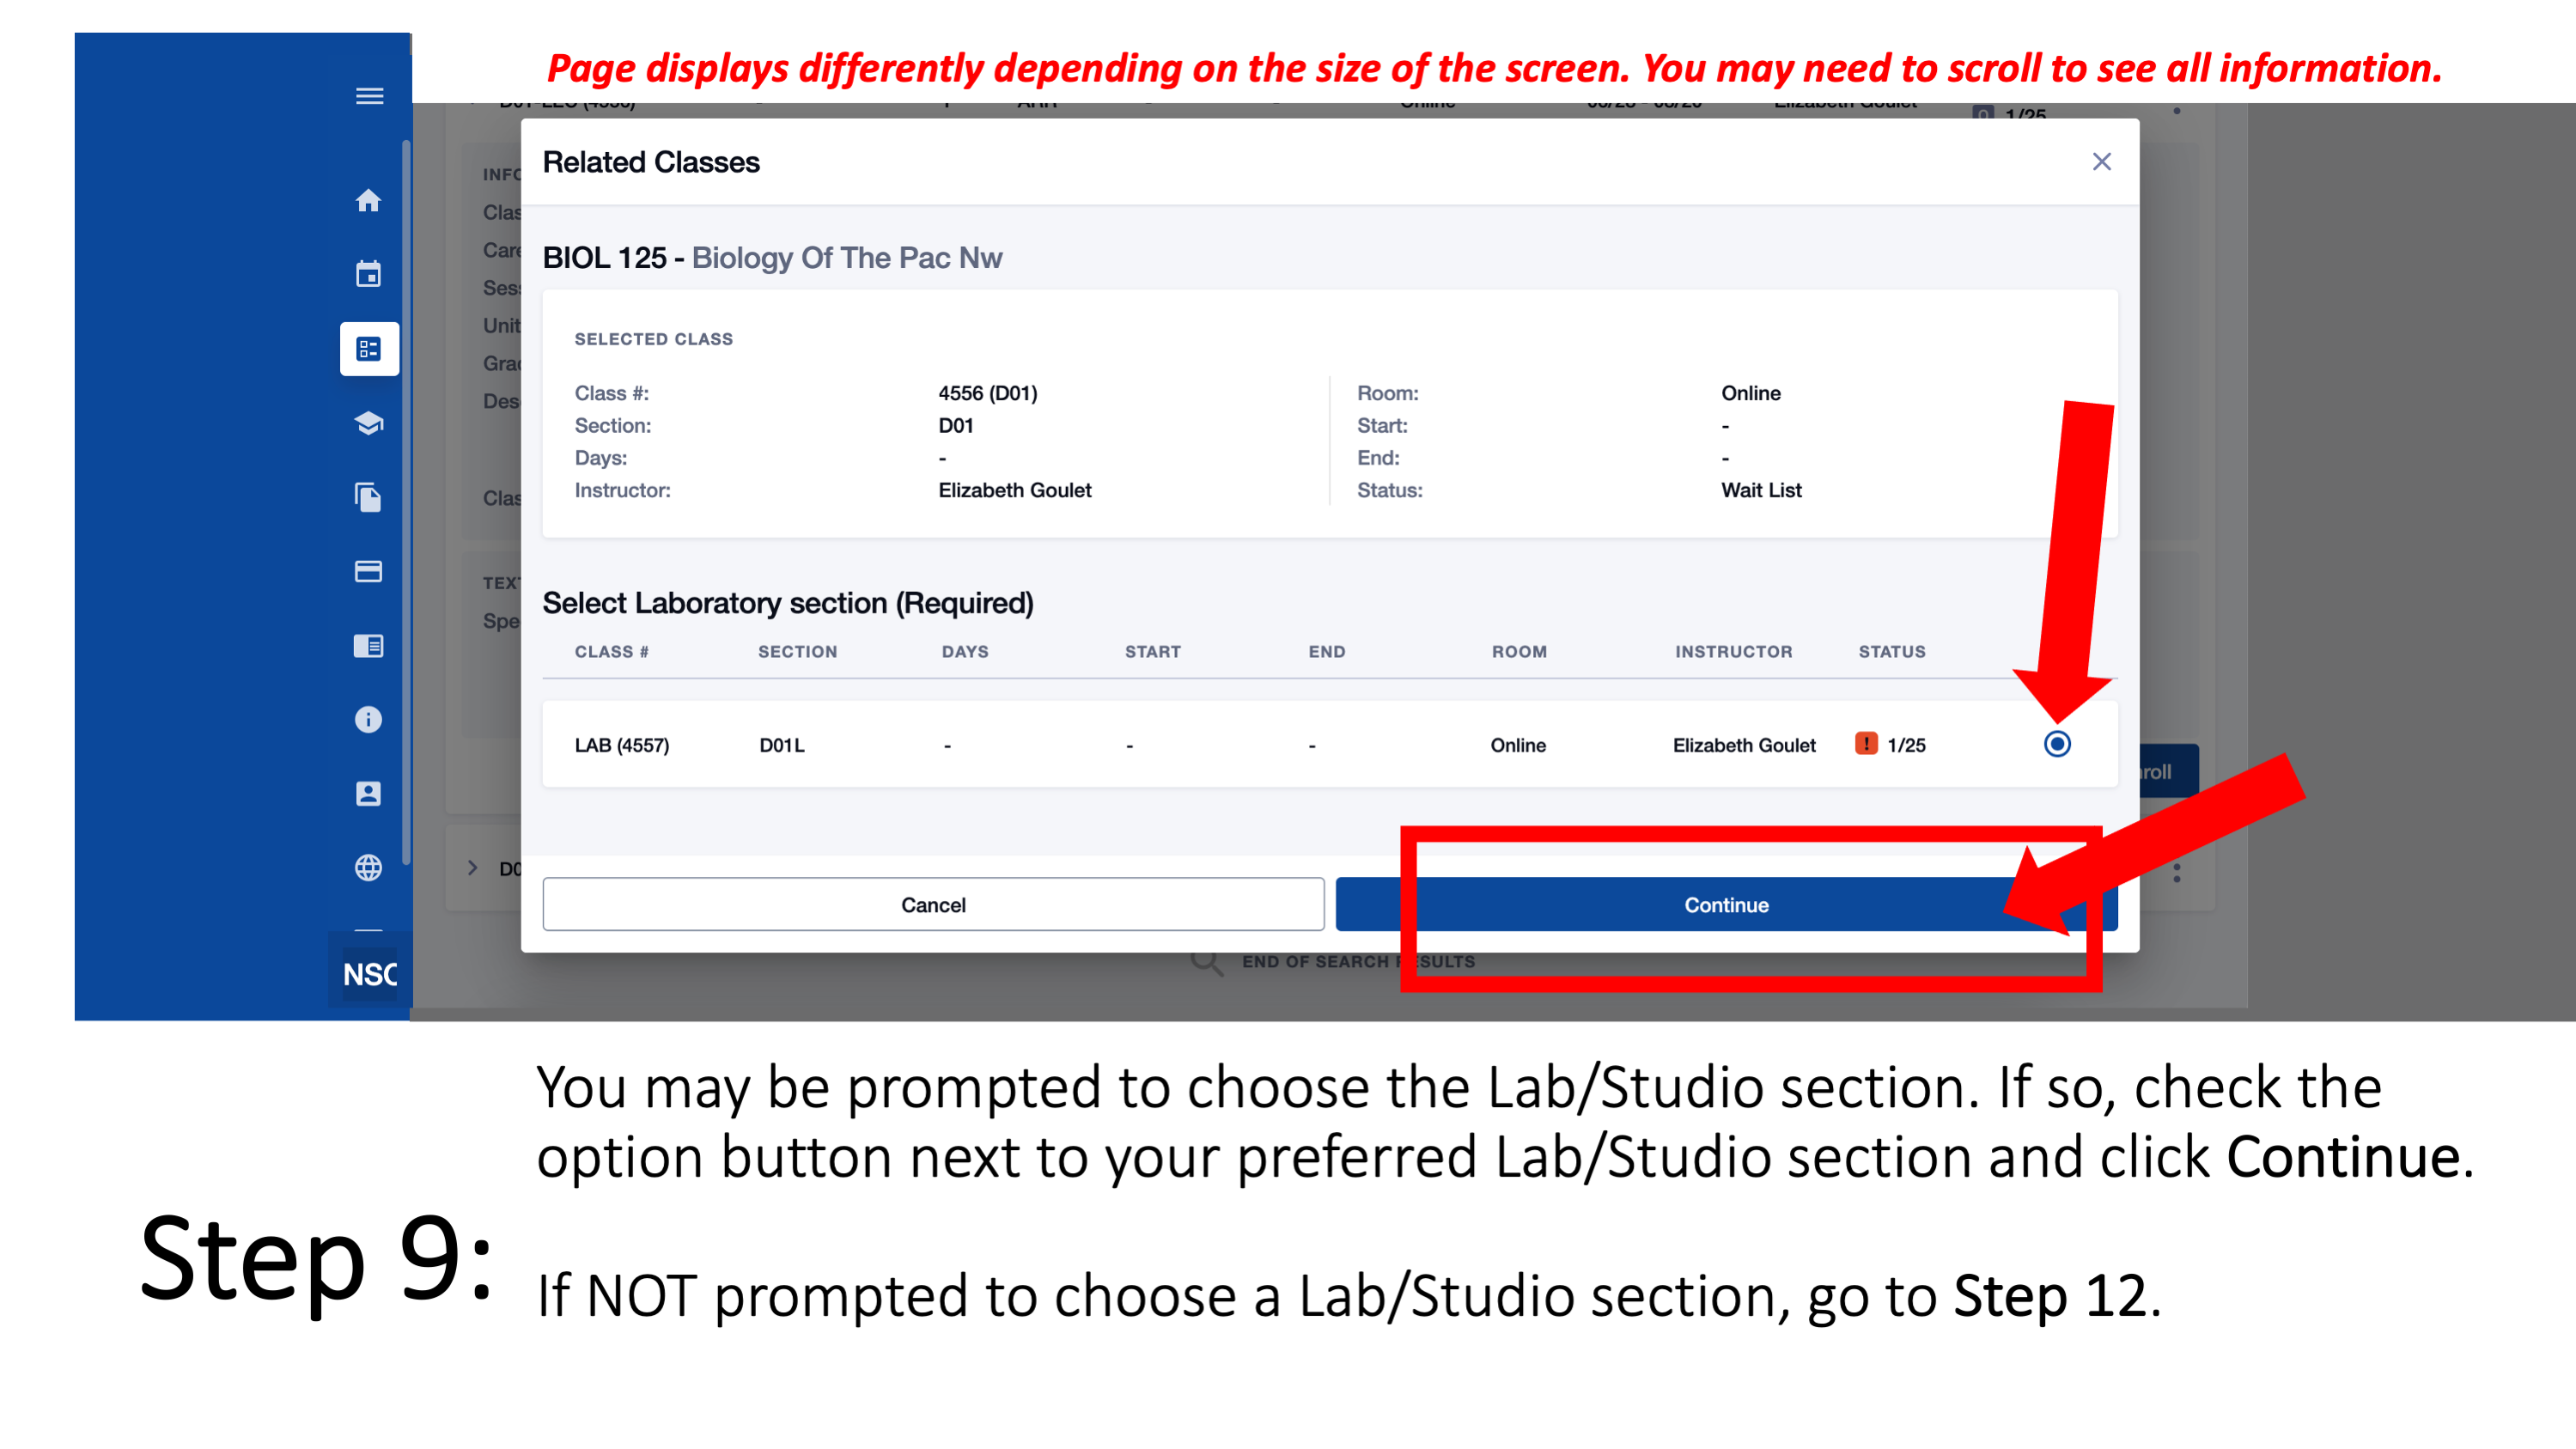 Step 9: You may be prompted to choose the Lab/Studio section. If so, check the option button next to your preferred Lab/Studio section and click Continue. If NOT prompted to choose a Lab/Studio section, go to Step 12.